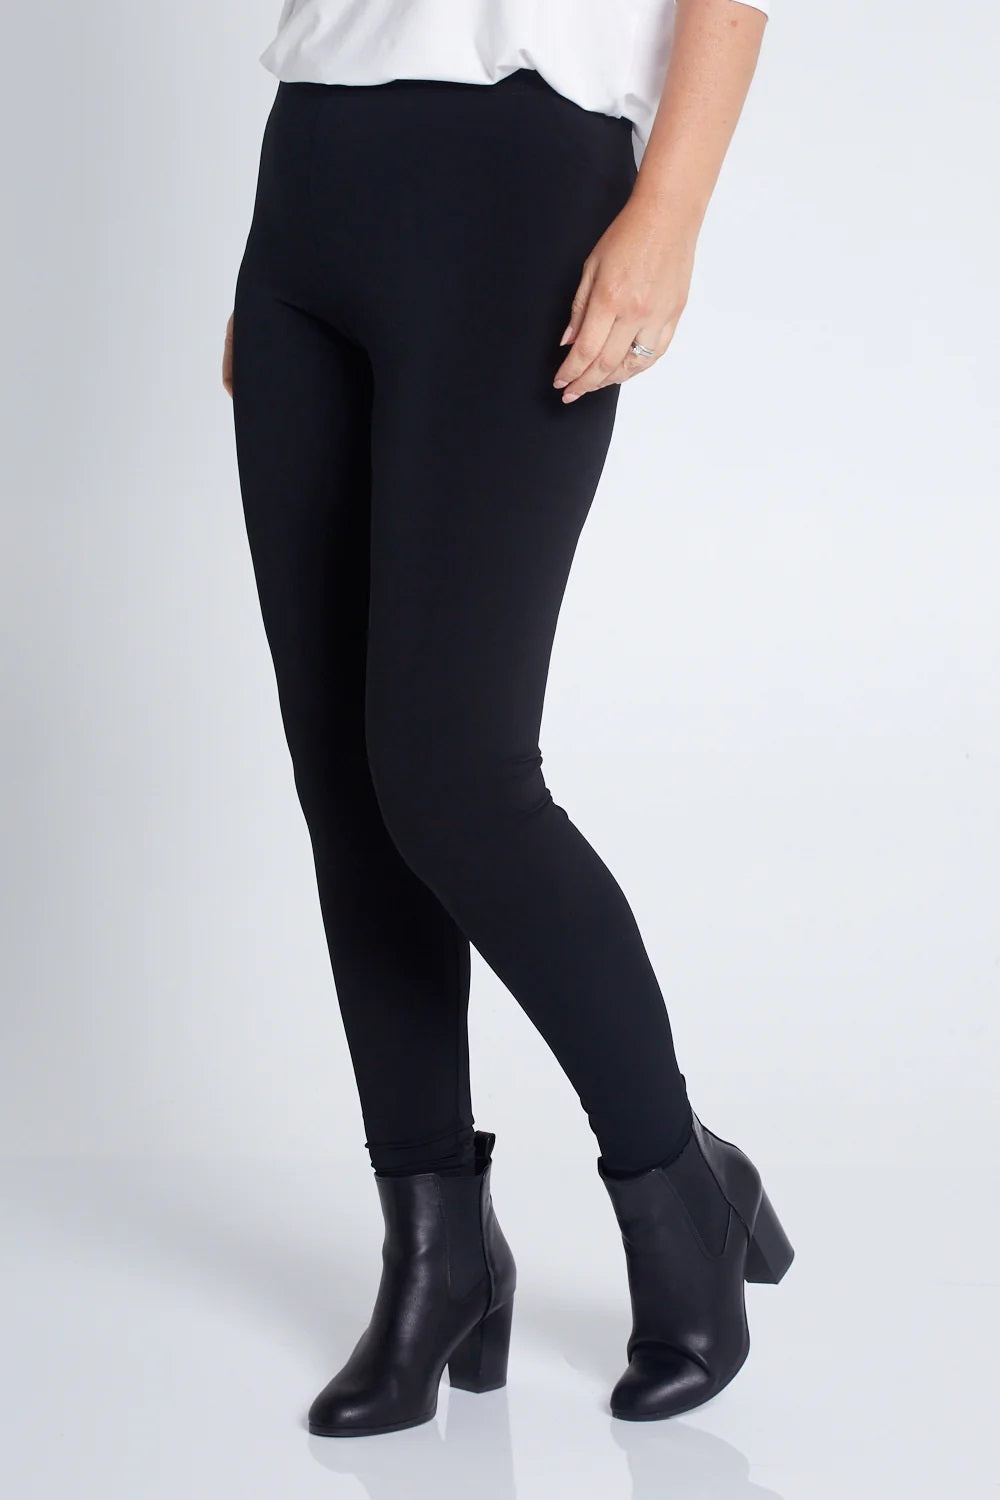 Stay cozy and stylish with our Comfy Non-Lined Leggings from Sofra - Mopas!  😍 Perfect for any occasion and only $9.74! 💸 #leggings